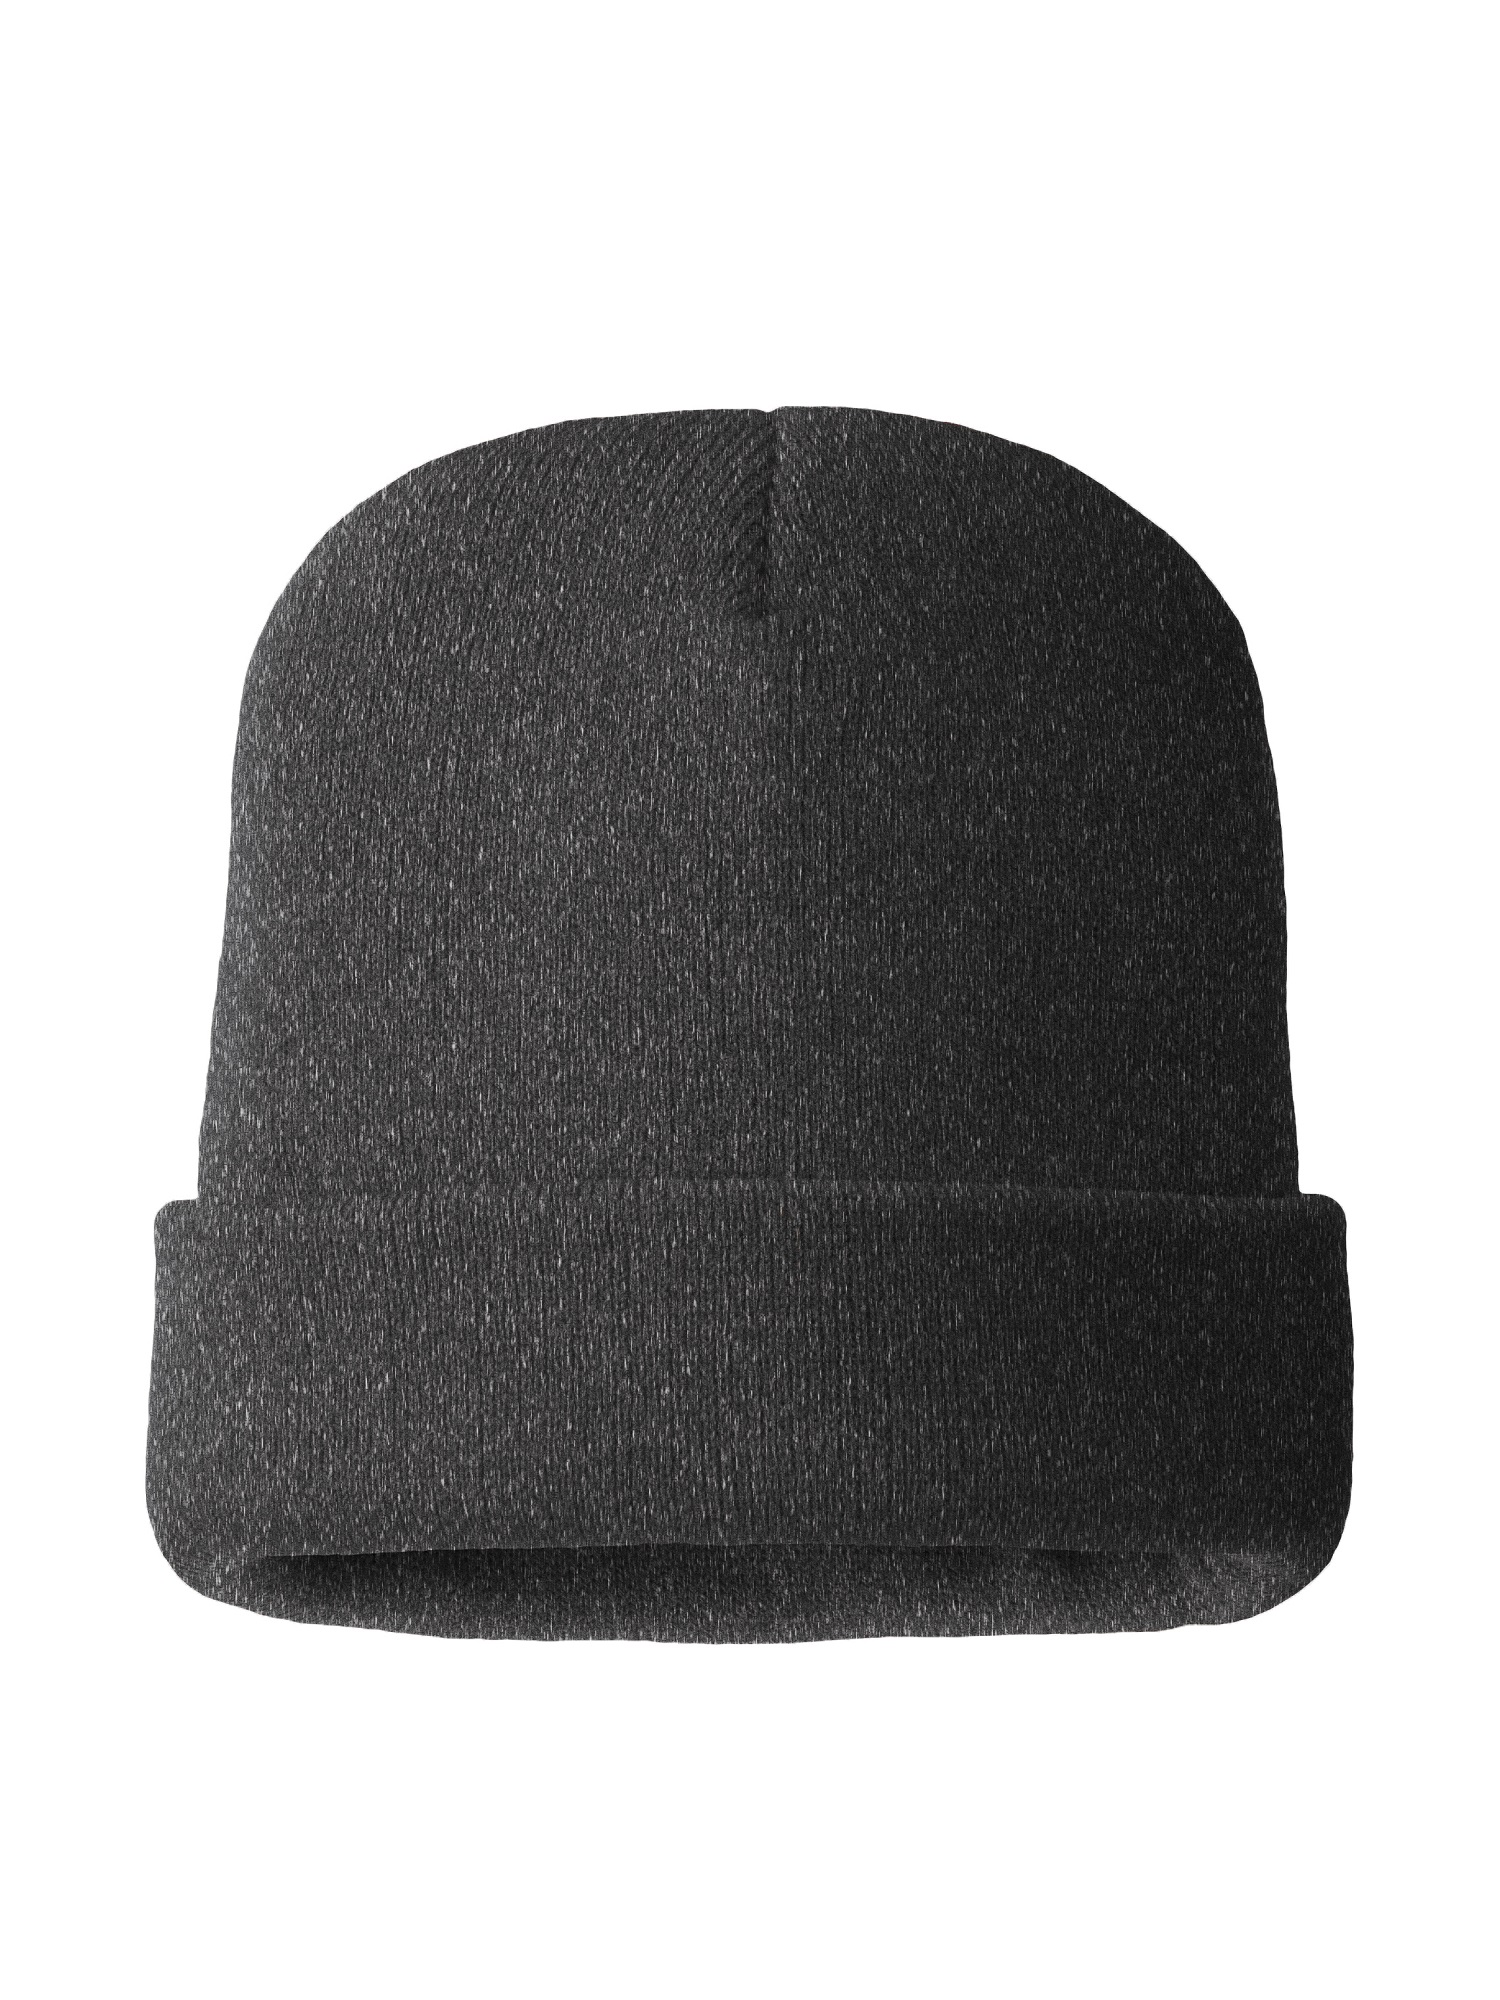 MO8252, Men's Knitted Arctic Hat, Thinsulate Lined - image 1 of 2